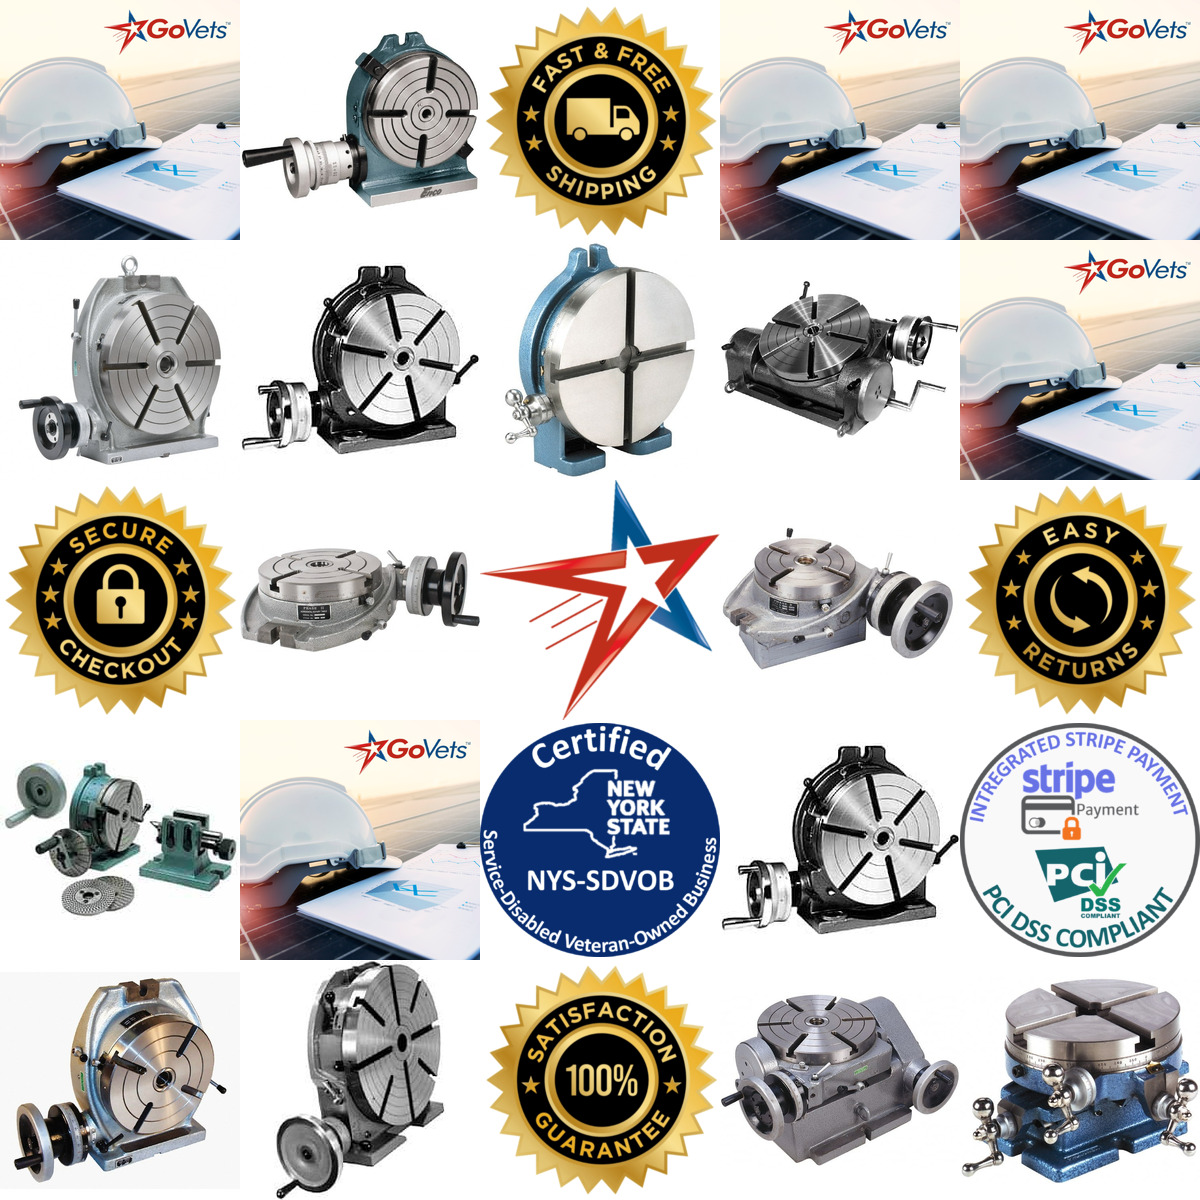 A selection of Rotary Machining Tables products on GoVets